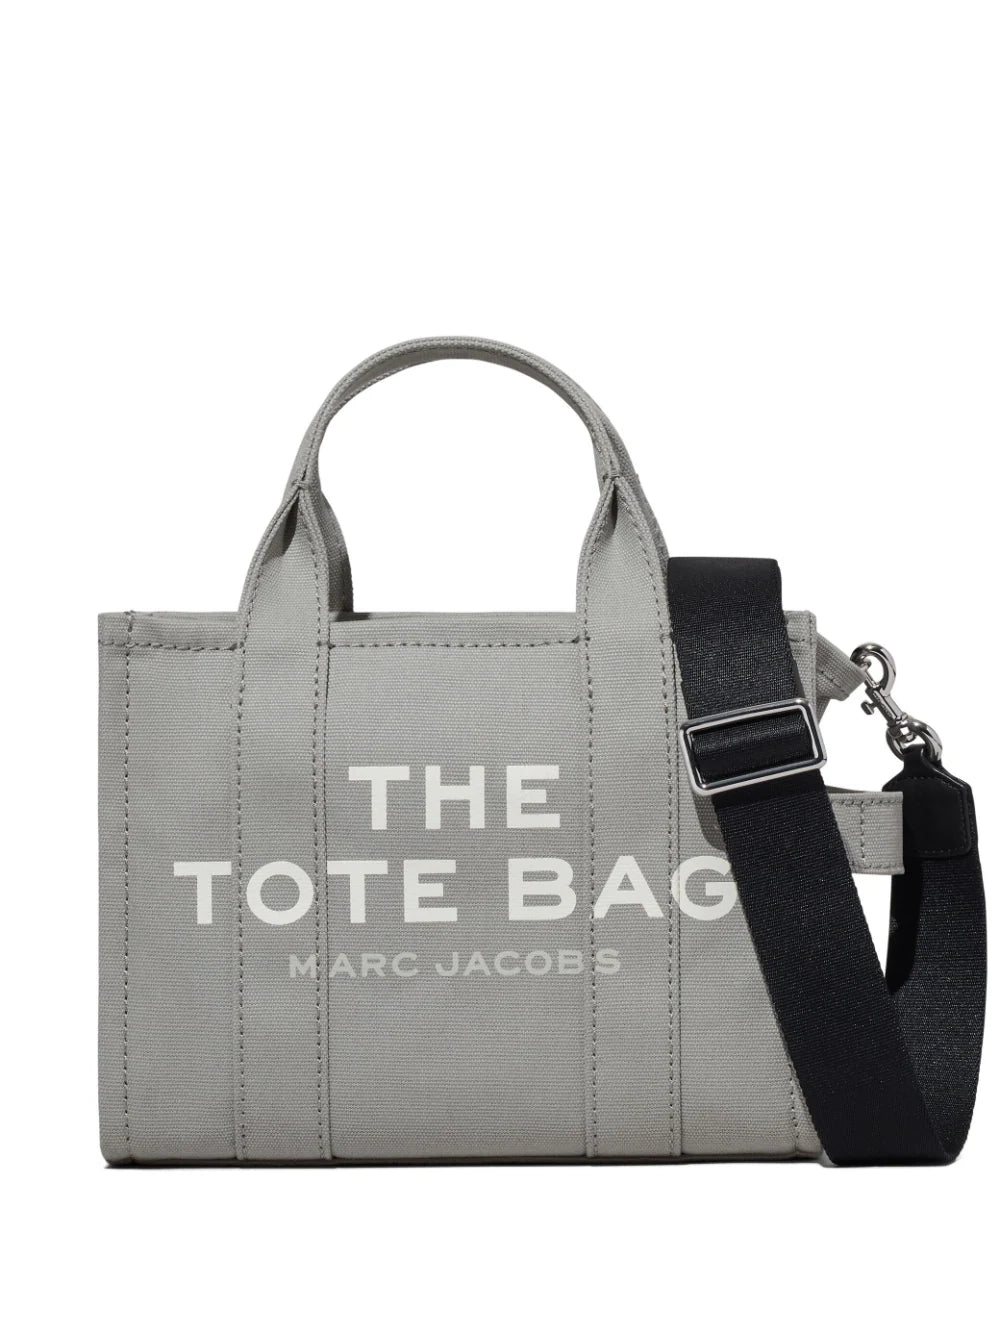 What's your favorite tote bag other than Longchamp and Marc Jacobs? :  r/handbags